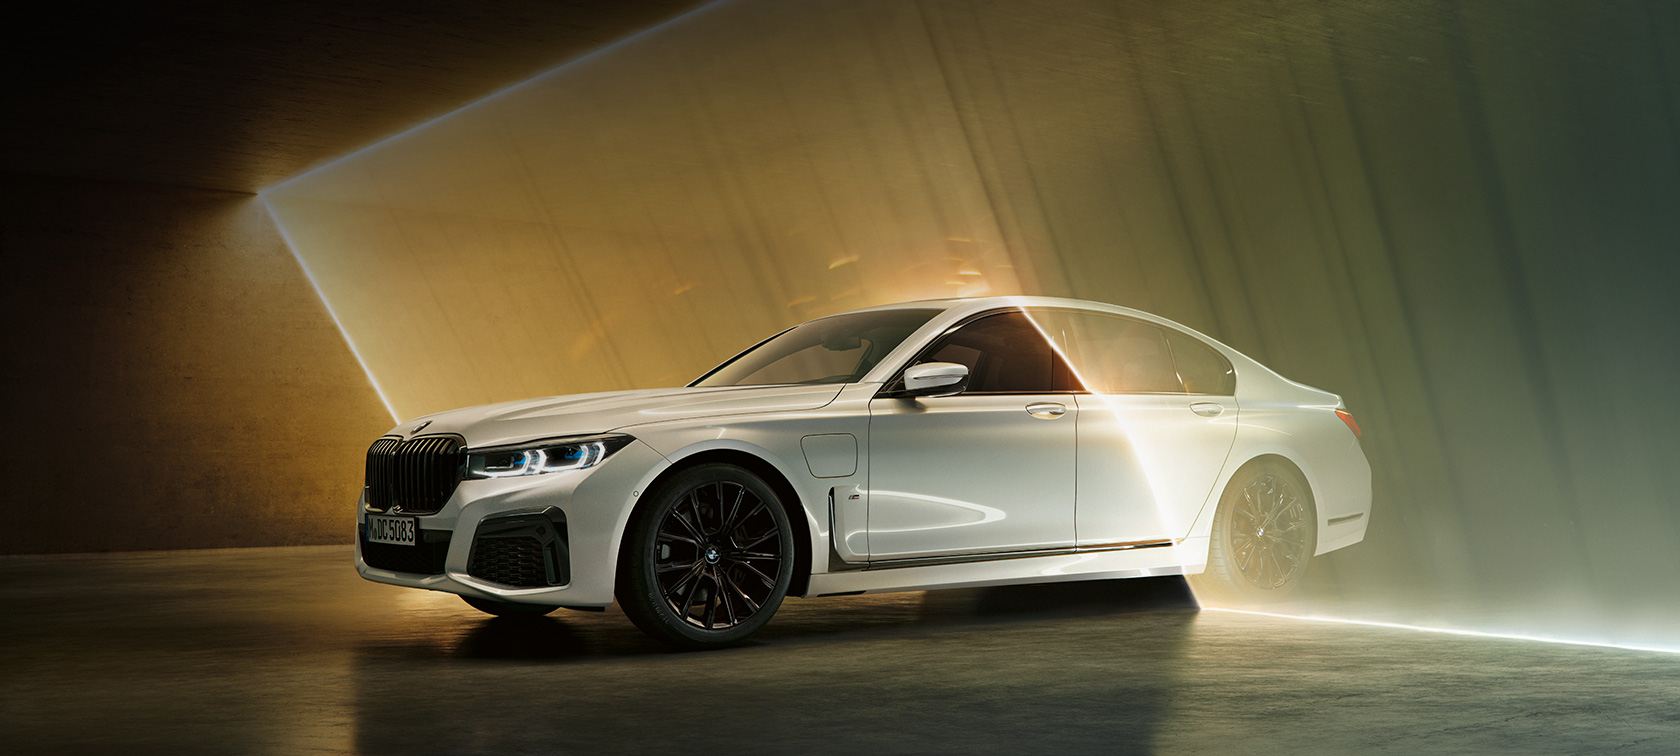 BMW 7 Series Sedan: white BMW in three-quarter front view surrounded by beam of light